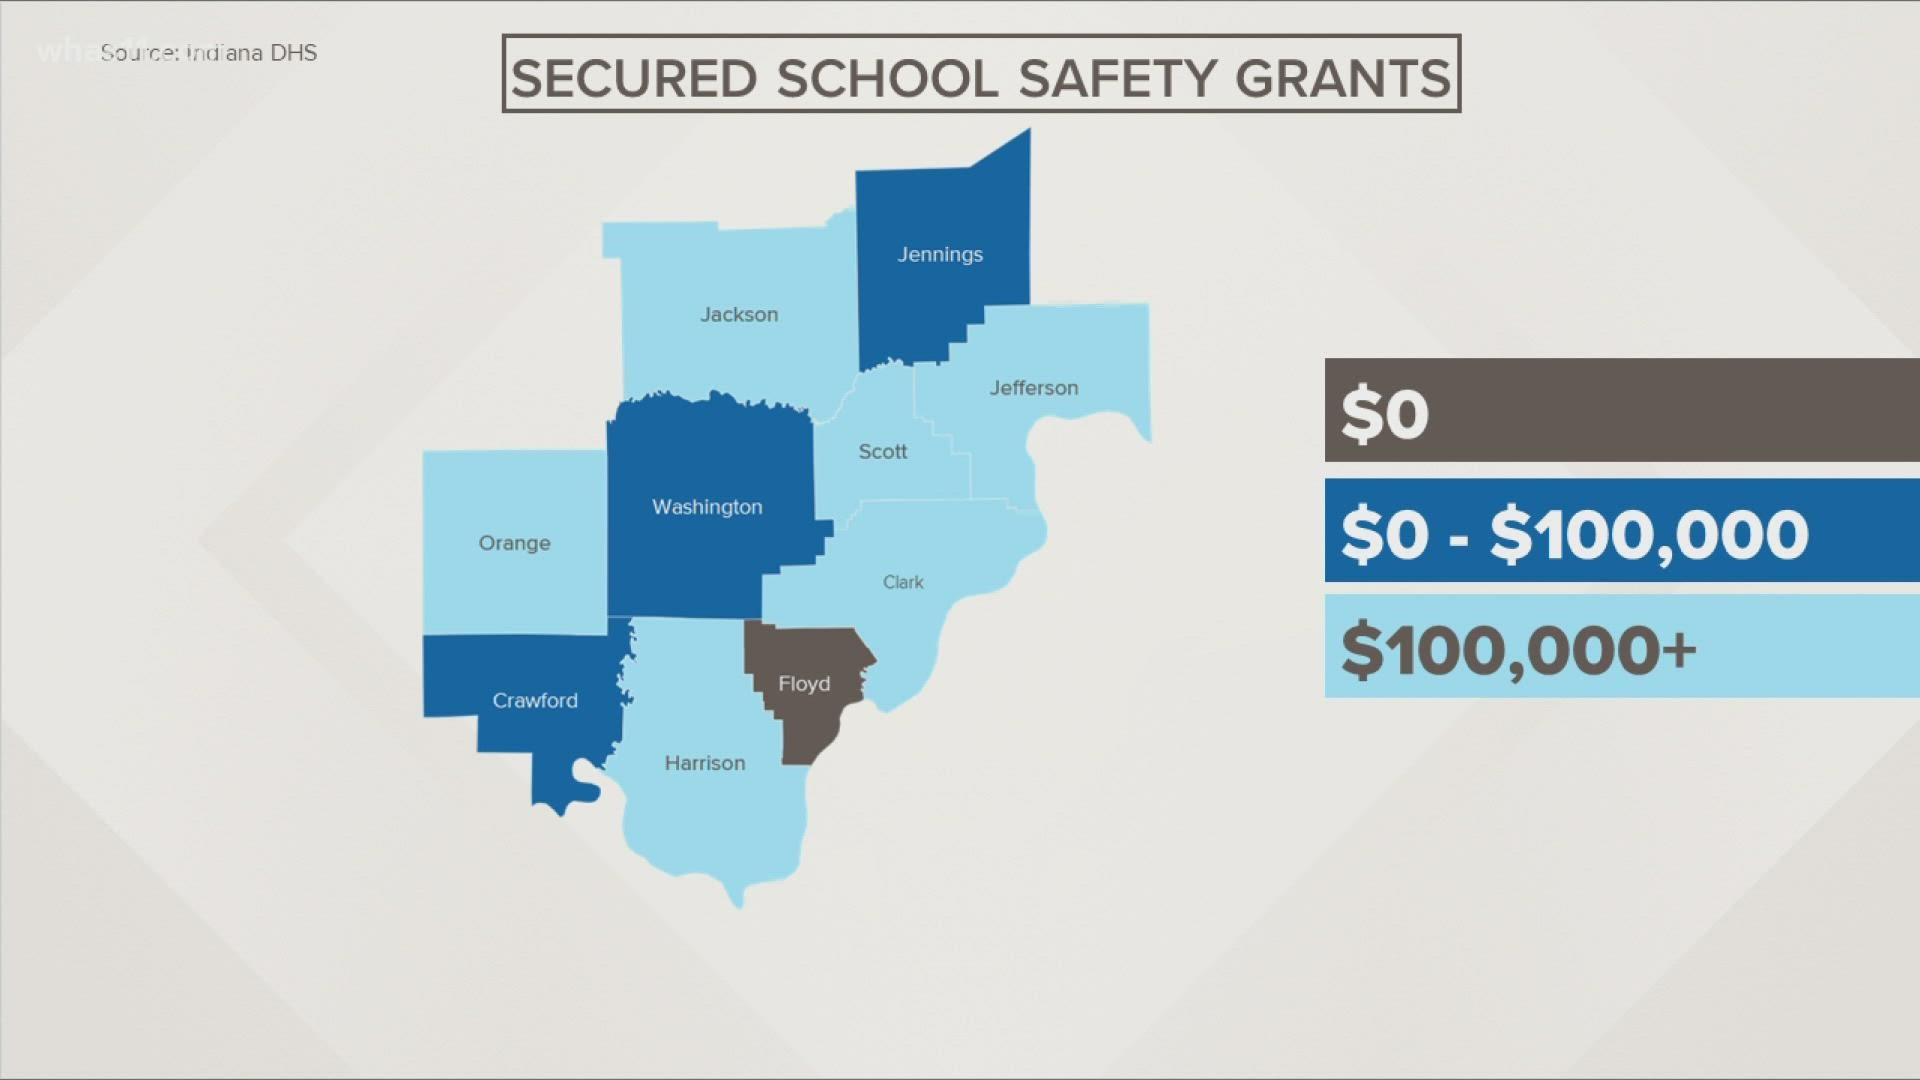 The program gives grants for school resource officers, active event warning systems, firearms training for teachers and staff, and threat assessment technology.